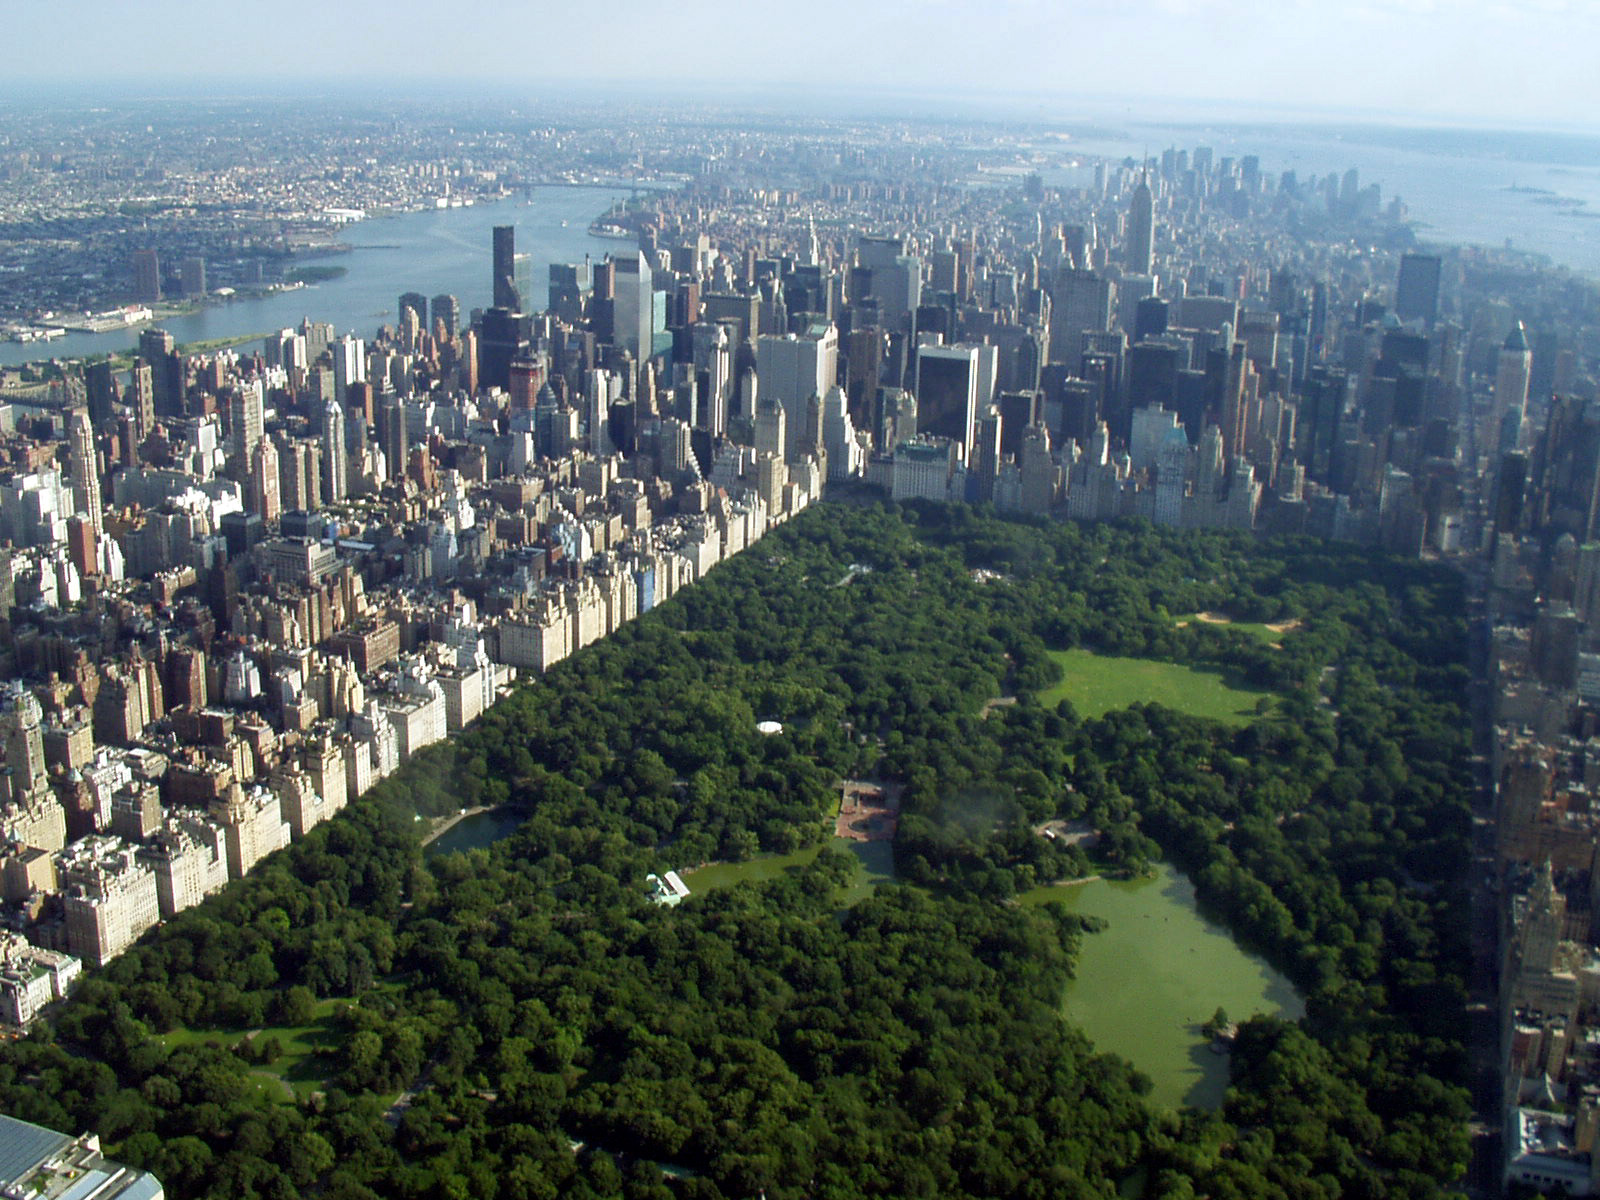 Download Central Park Wallpaper For Your Friend - Nyc Central Park - HD Wallpaper 